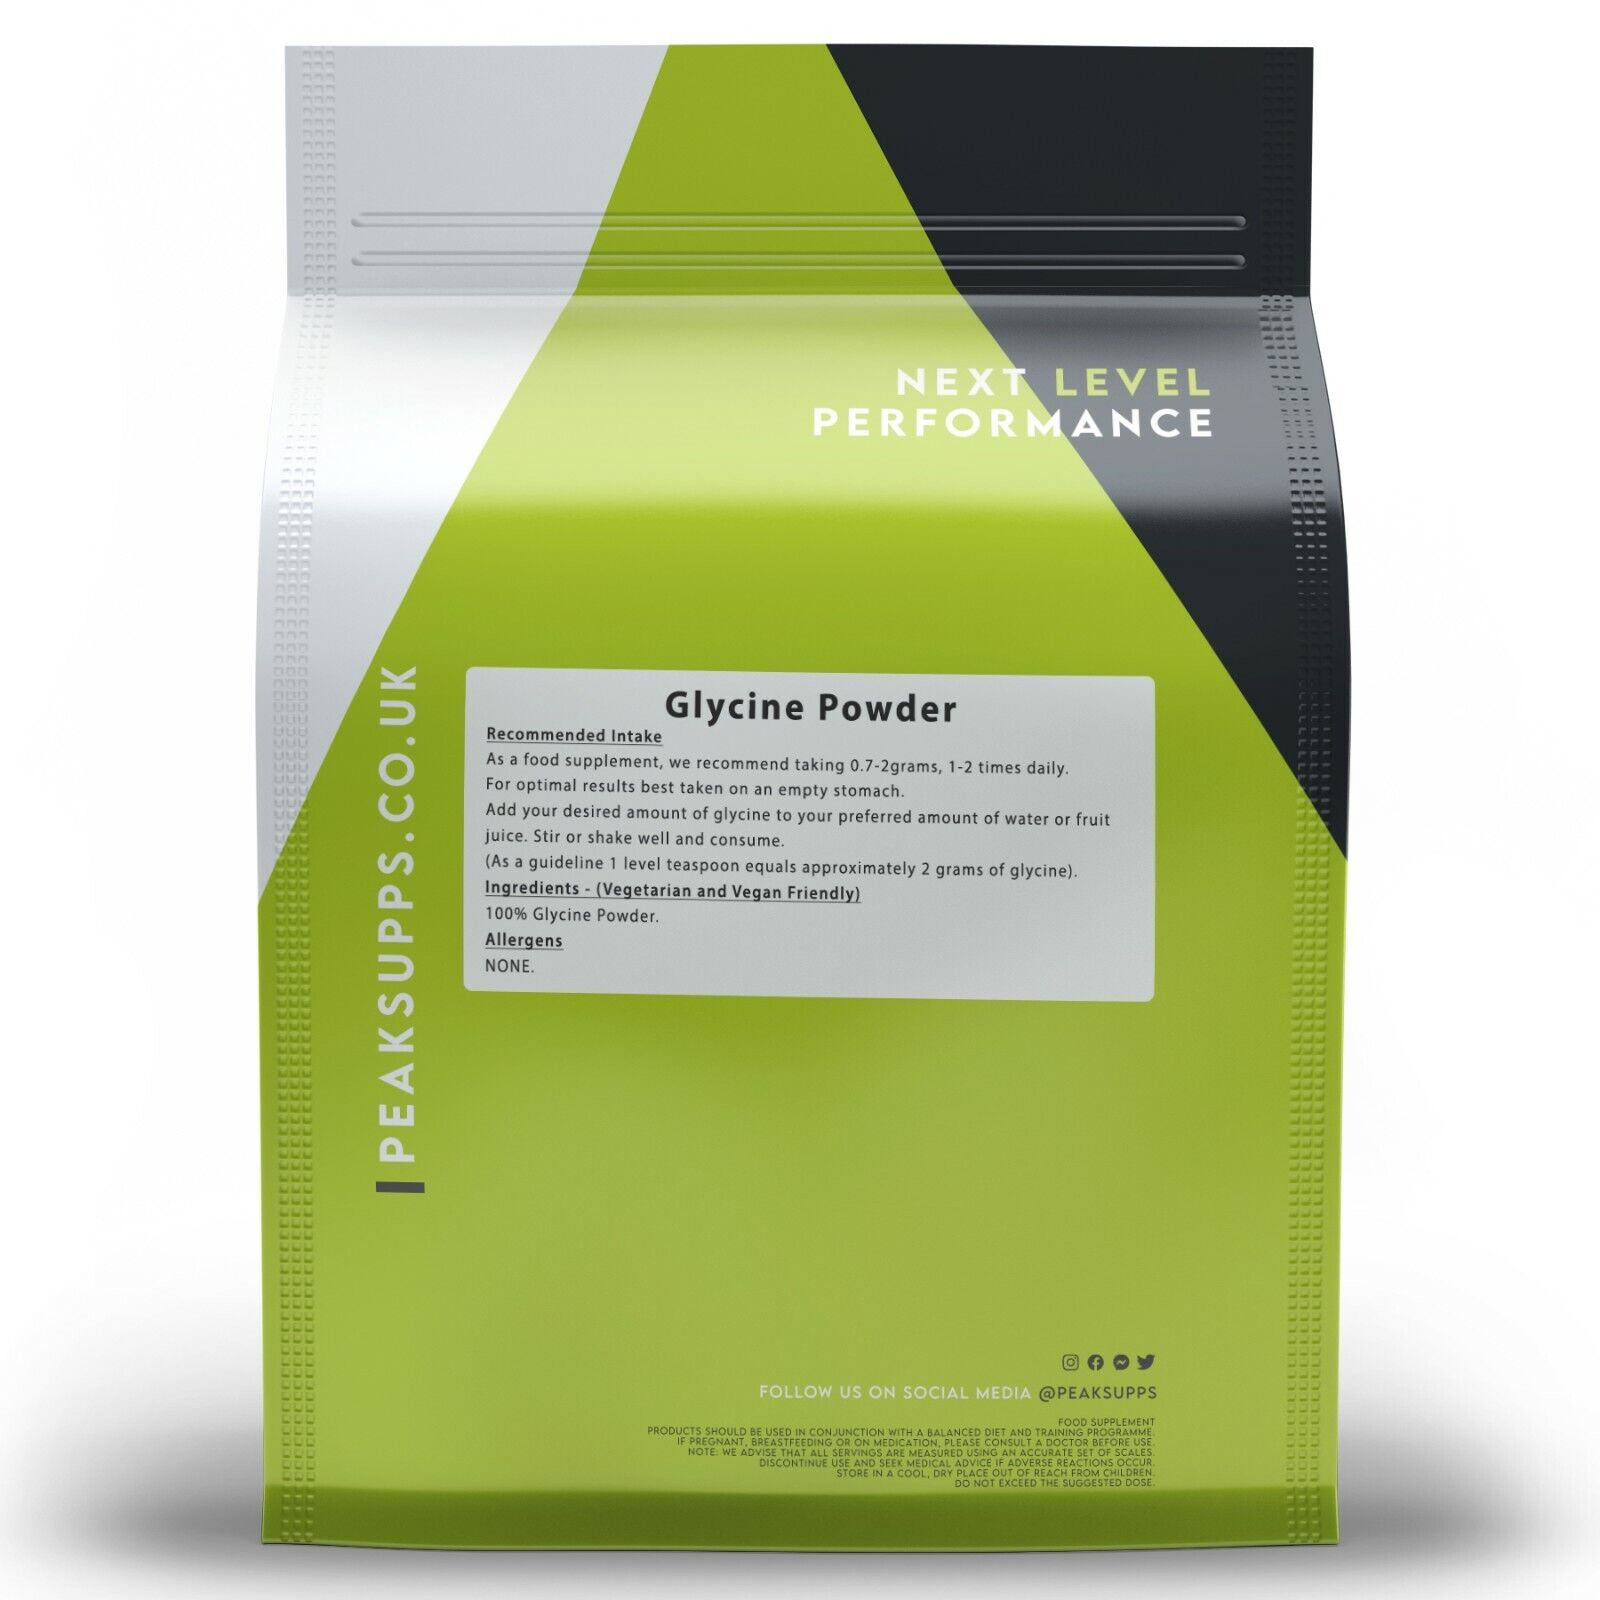 Glycine Powder for Sleep, GH Release & Recovery